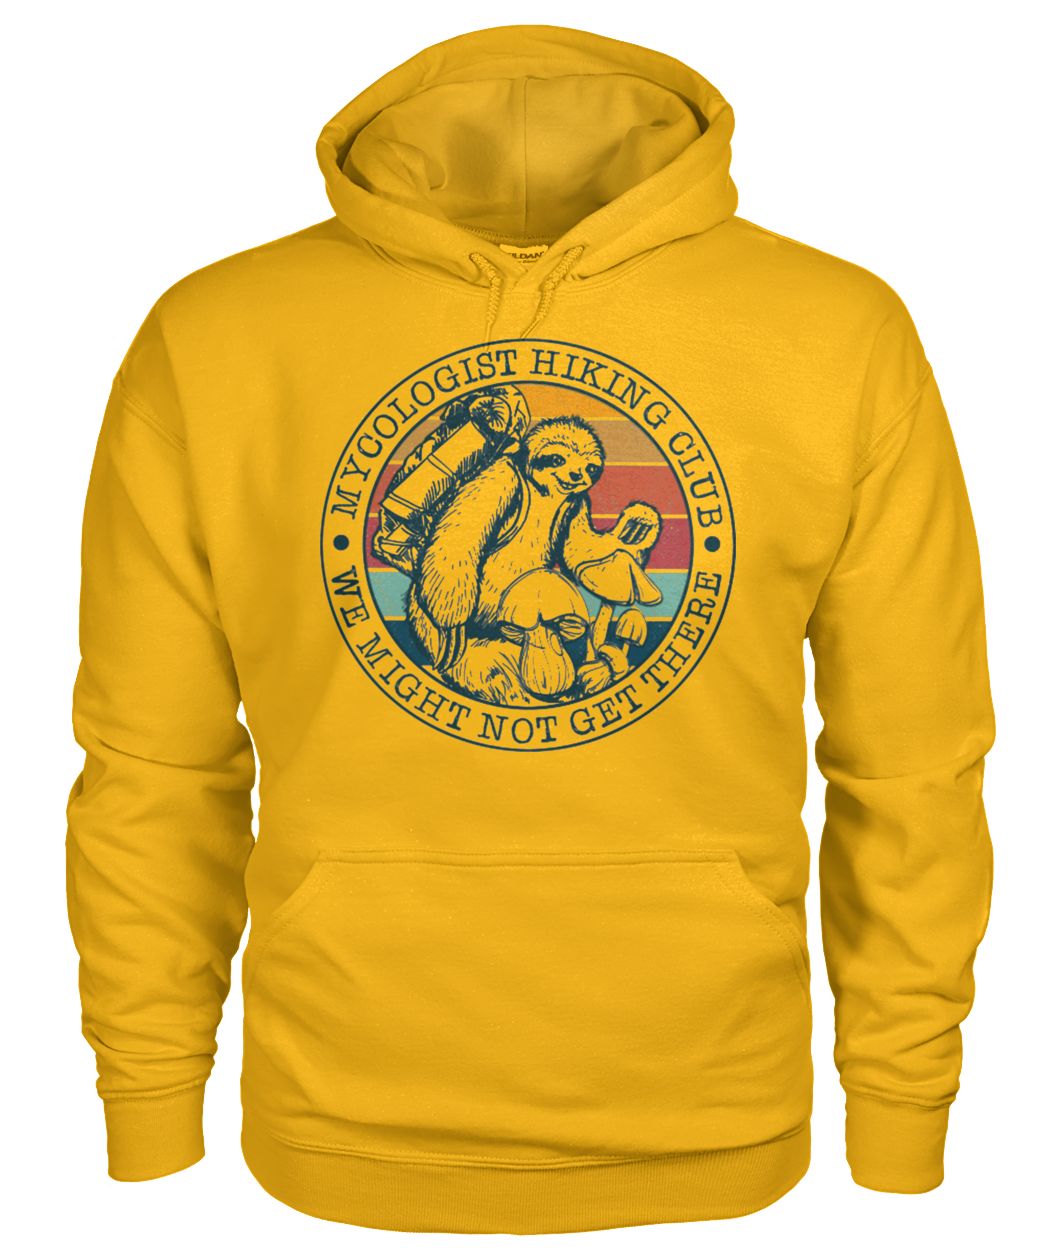 Mycologist hiking club we might not get there sloth gildan hoodie